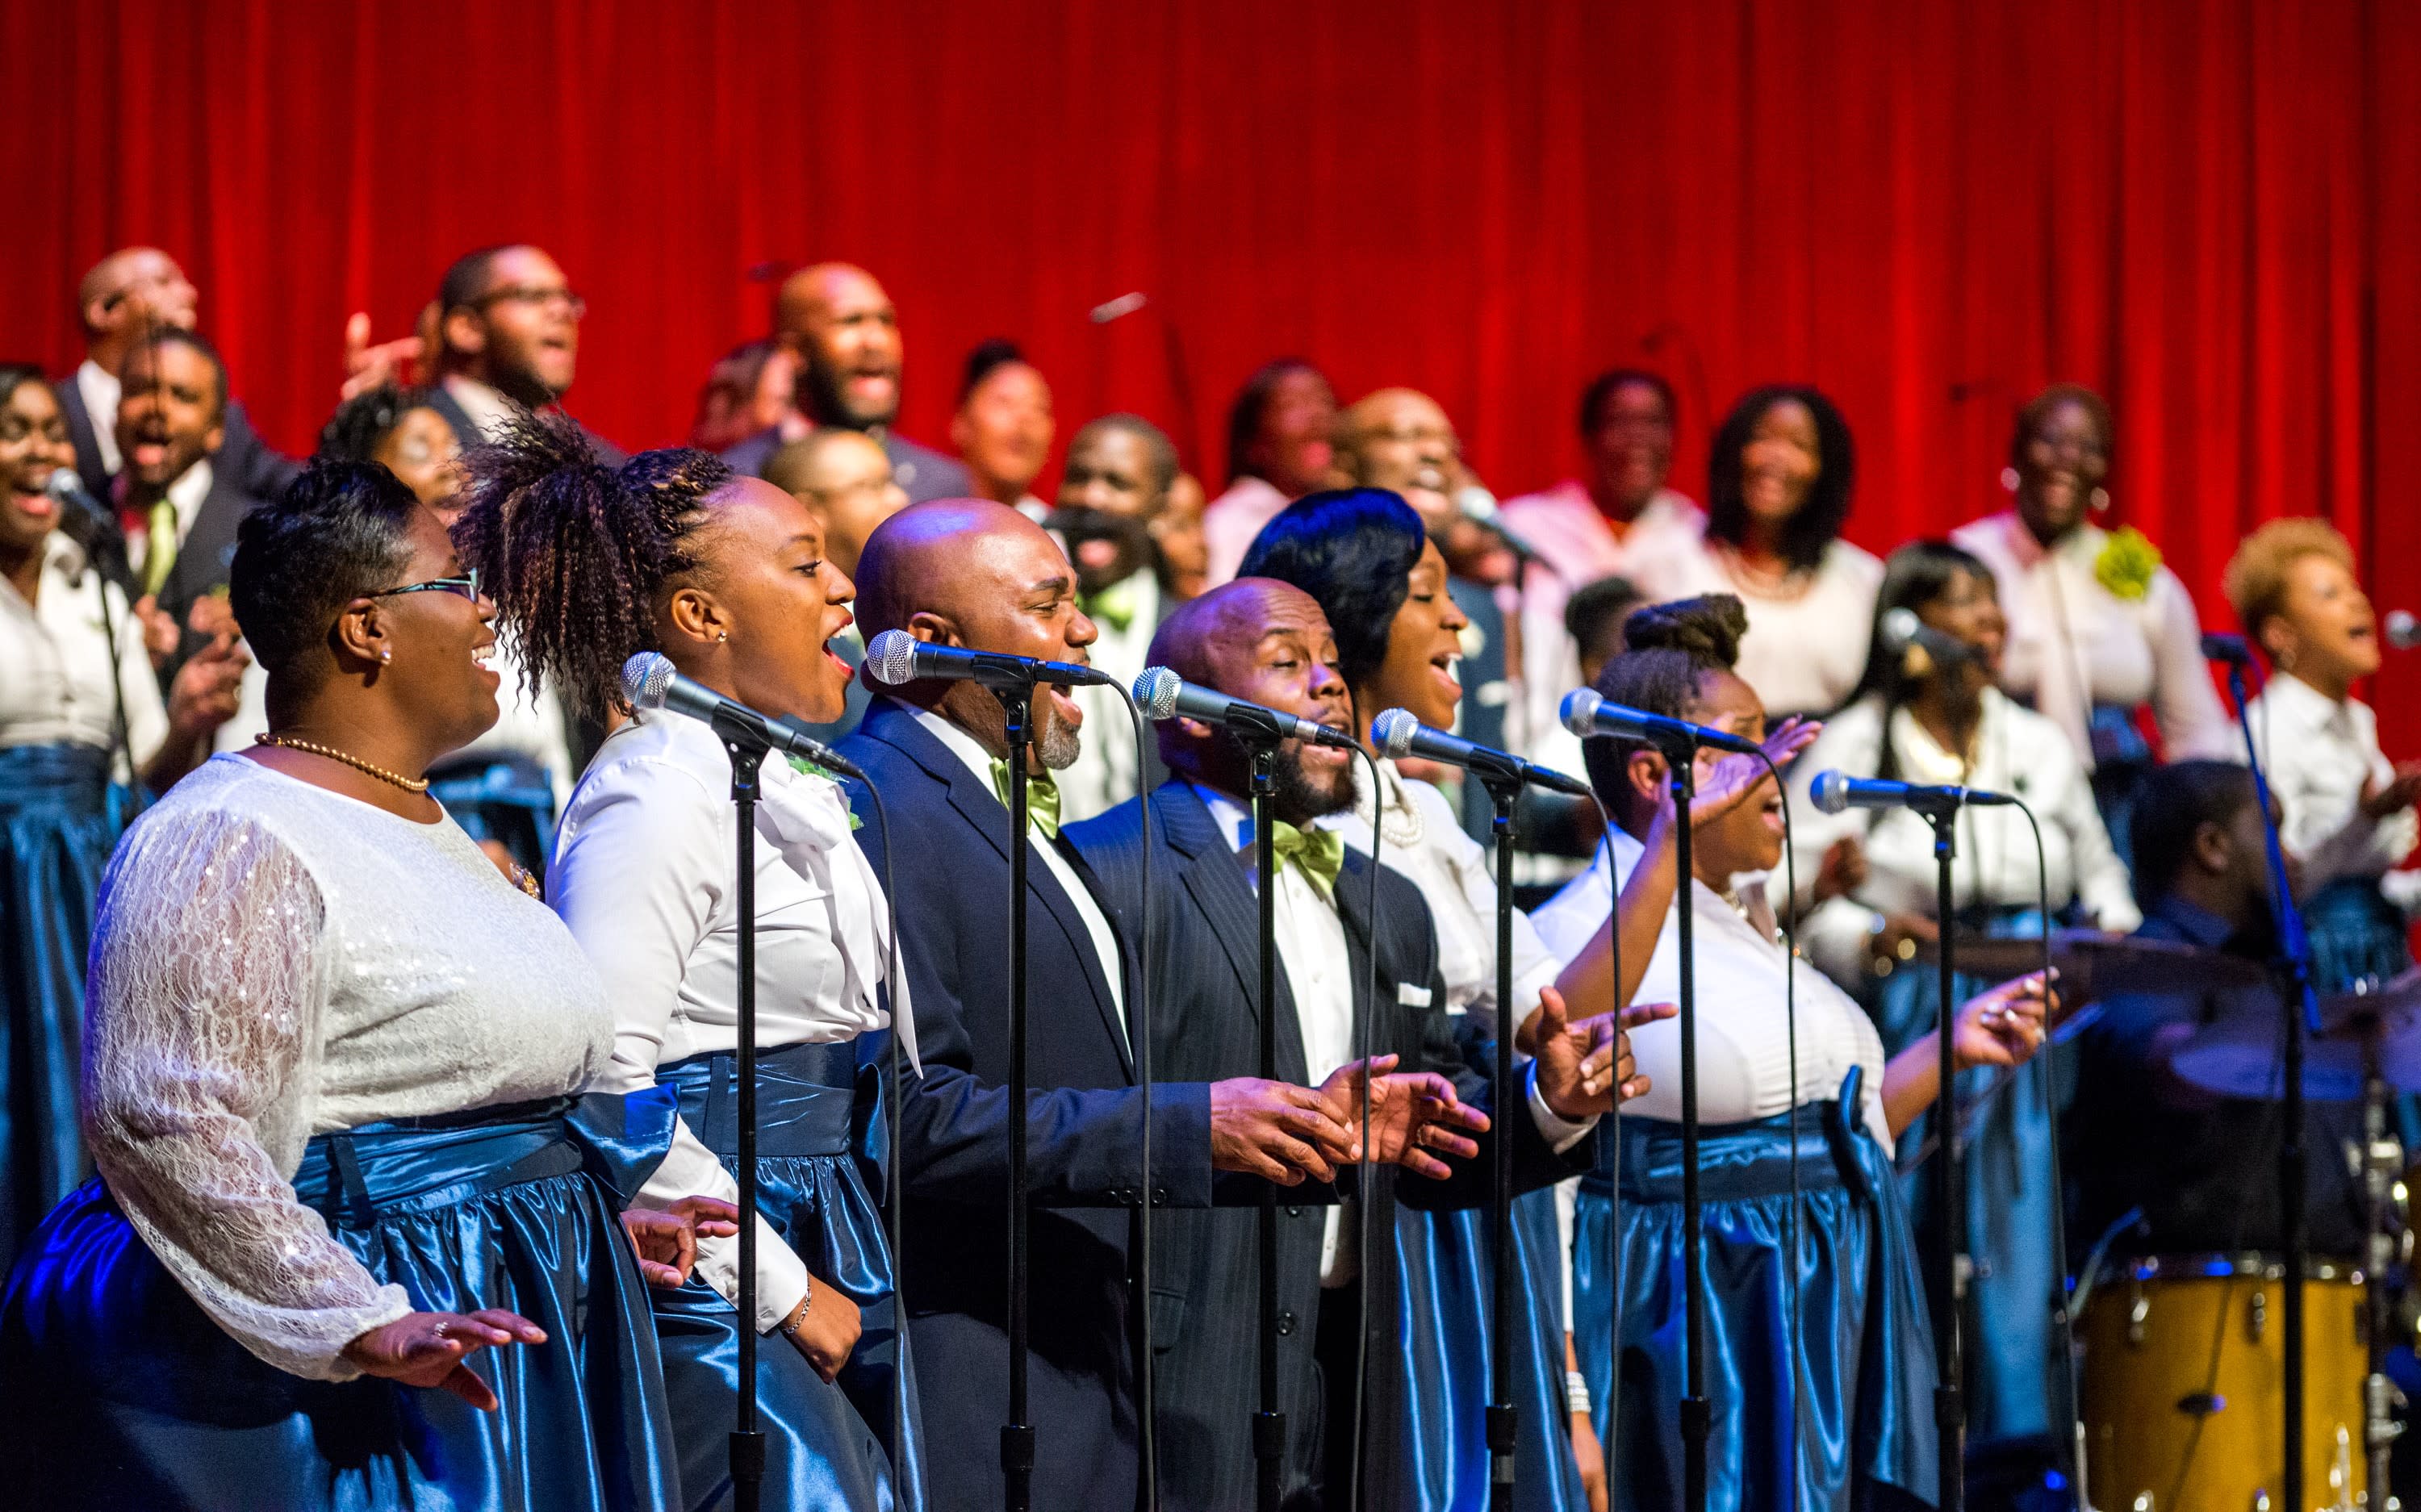 The Miami Mass Choir performs, along with a national headliner and a local choir, as part of Free Gospel Sundays, held four times a year at the Adrienne Arsht Center in downtown Miami. 